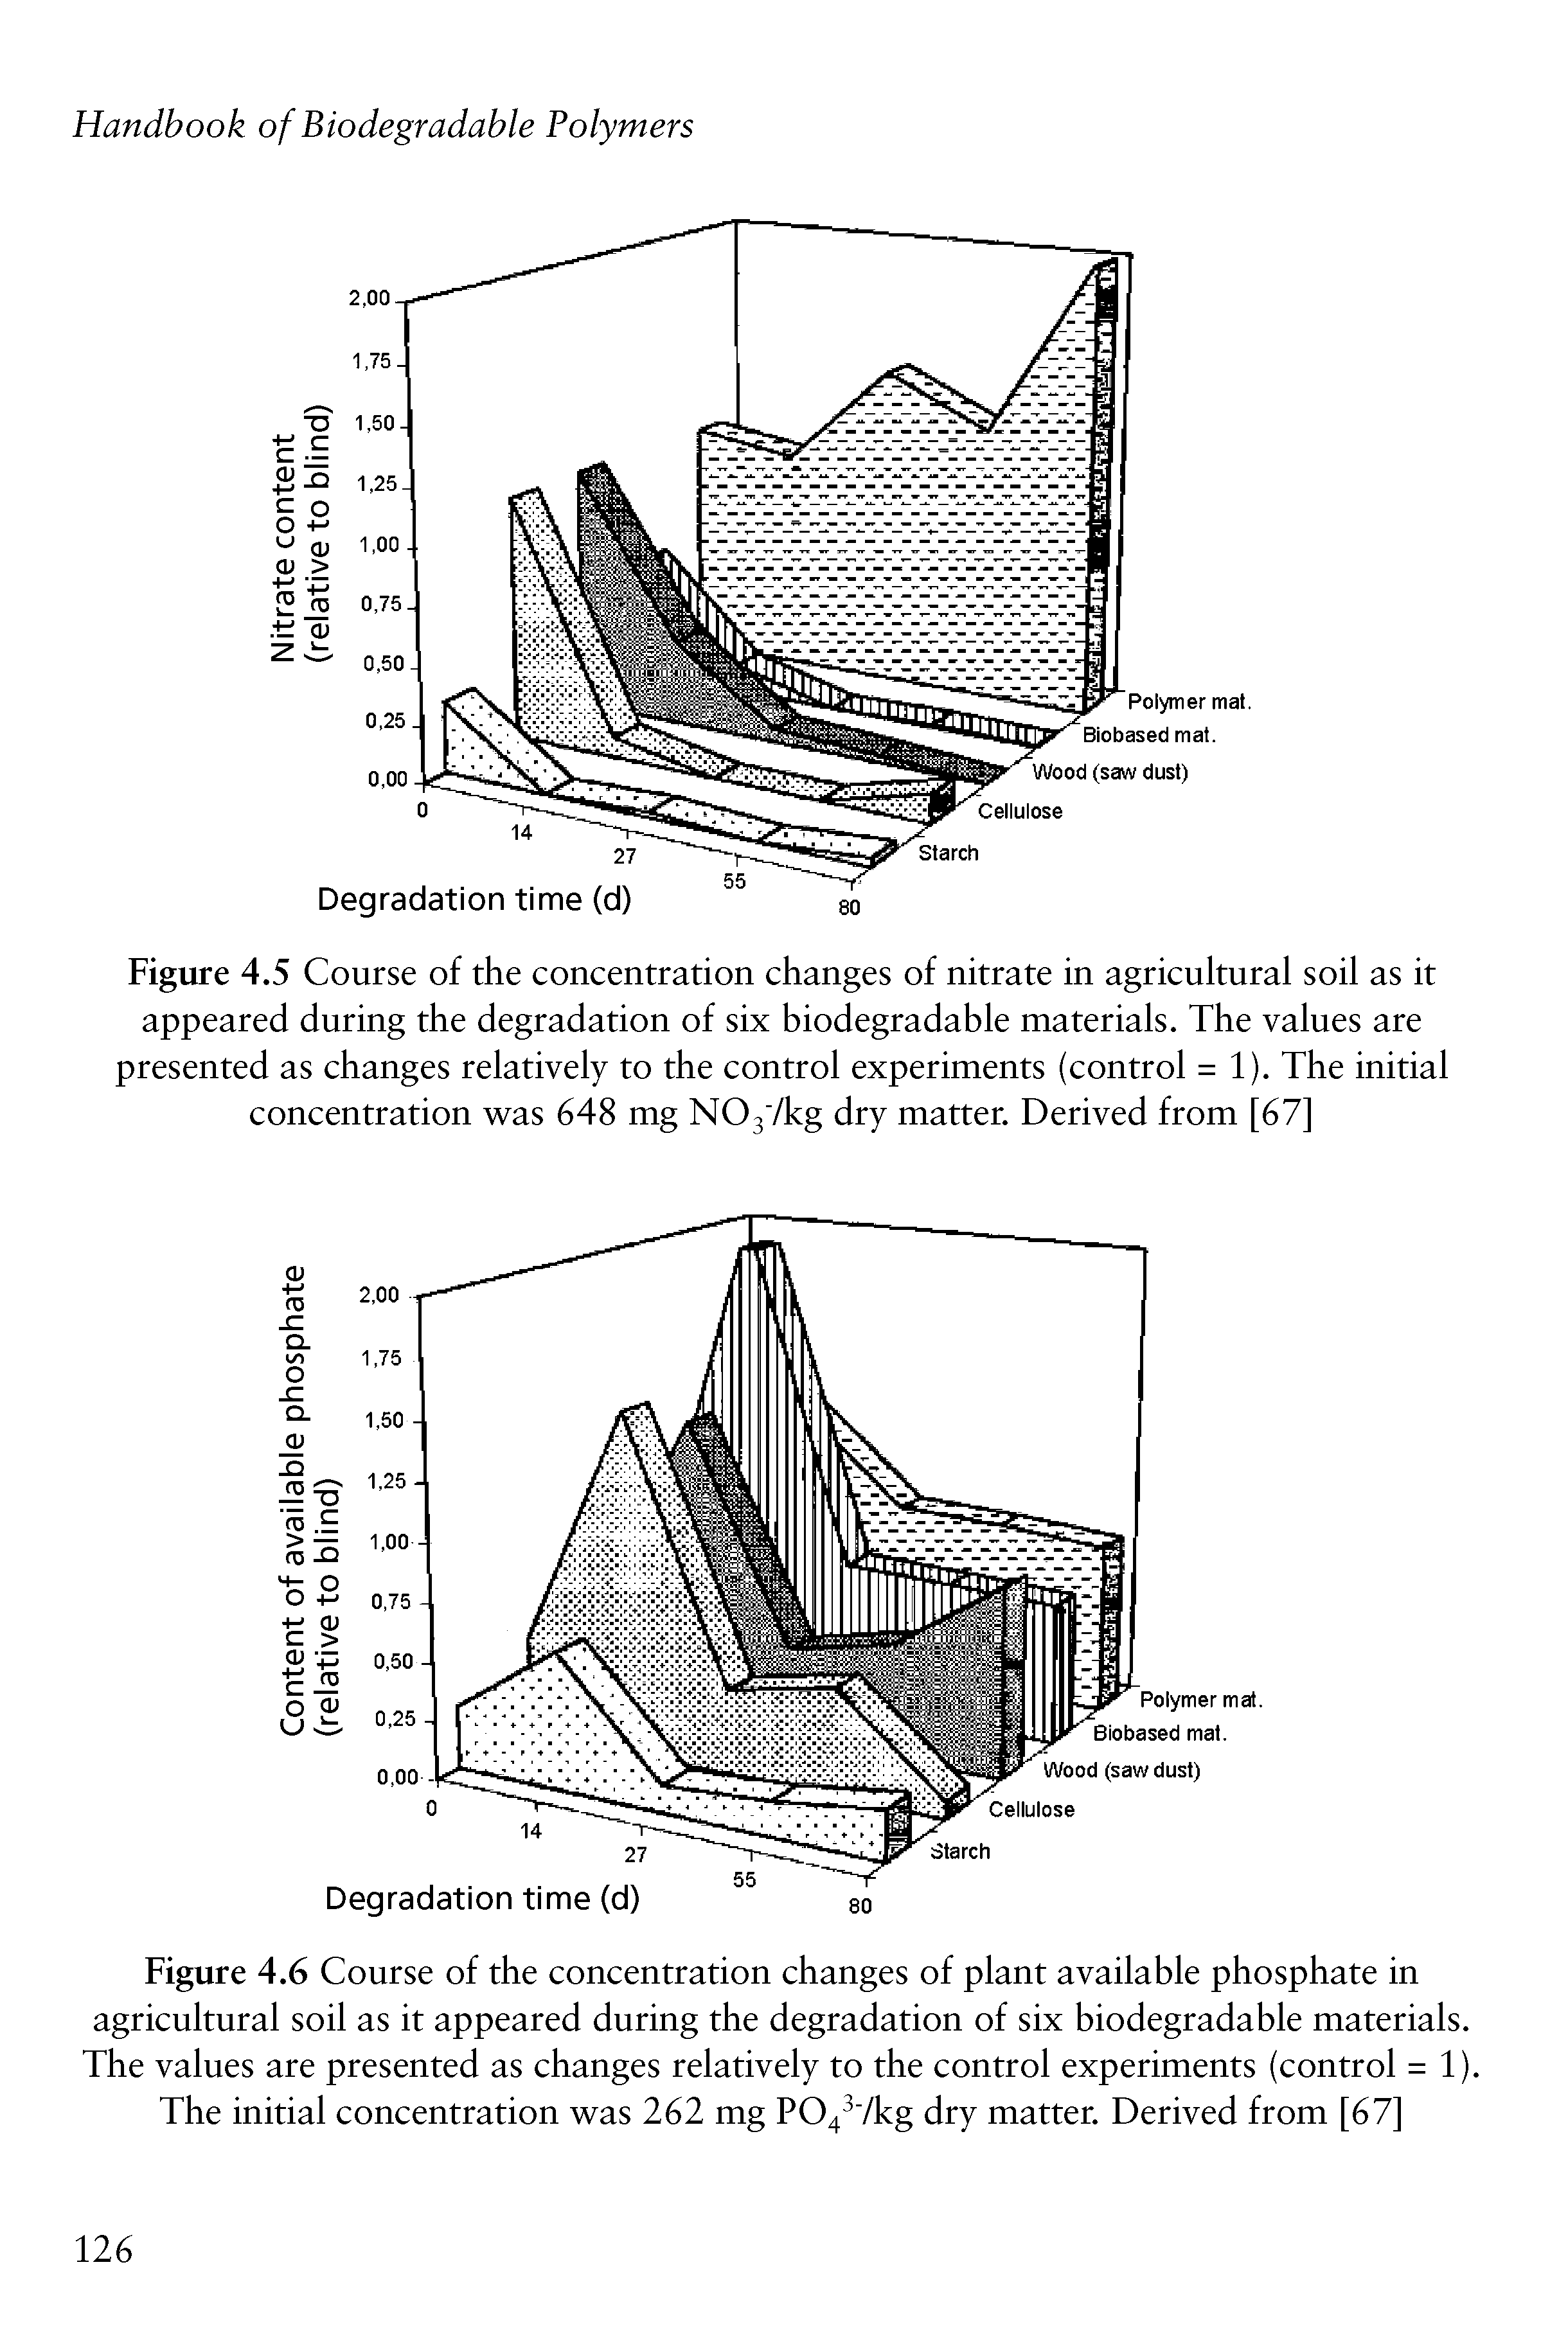 Figure 4.6 Course of the concentration changes of plant available phosphate in agricultural soil as it appeared during the degradation of six biodegradable materials. The values are presented as changes relatively to the control experiments (control = 1). The initial concentration was 262 mg P04 Vkg dry matter. Derived from [67]...